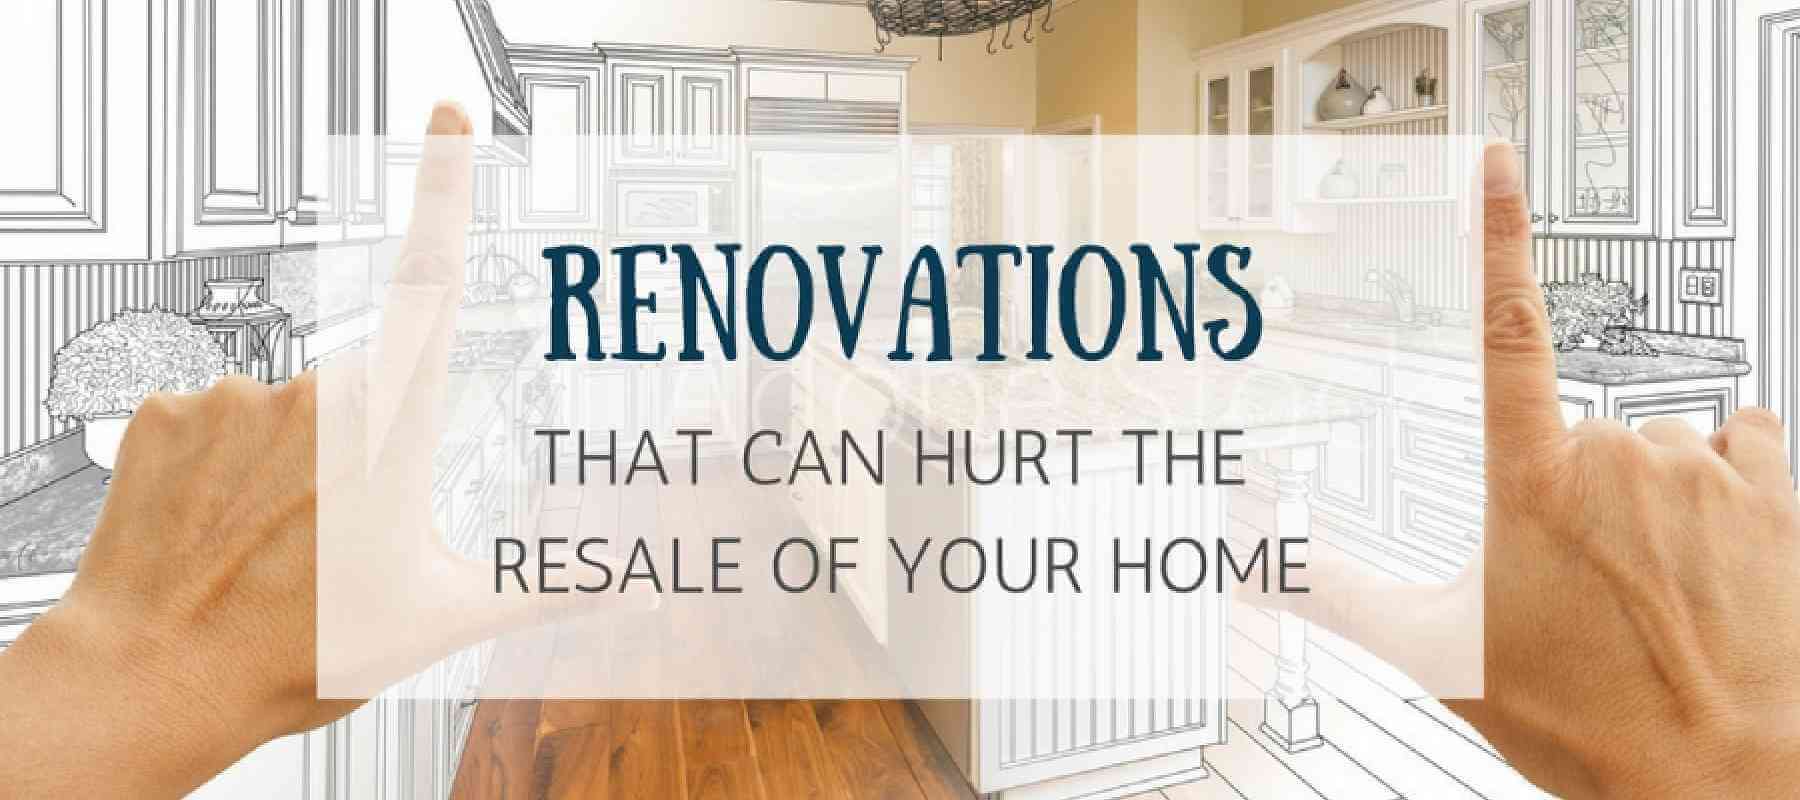 7 Home Renovations that will Hurt Resale